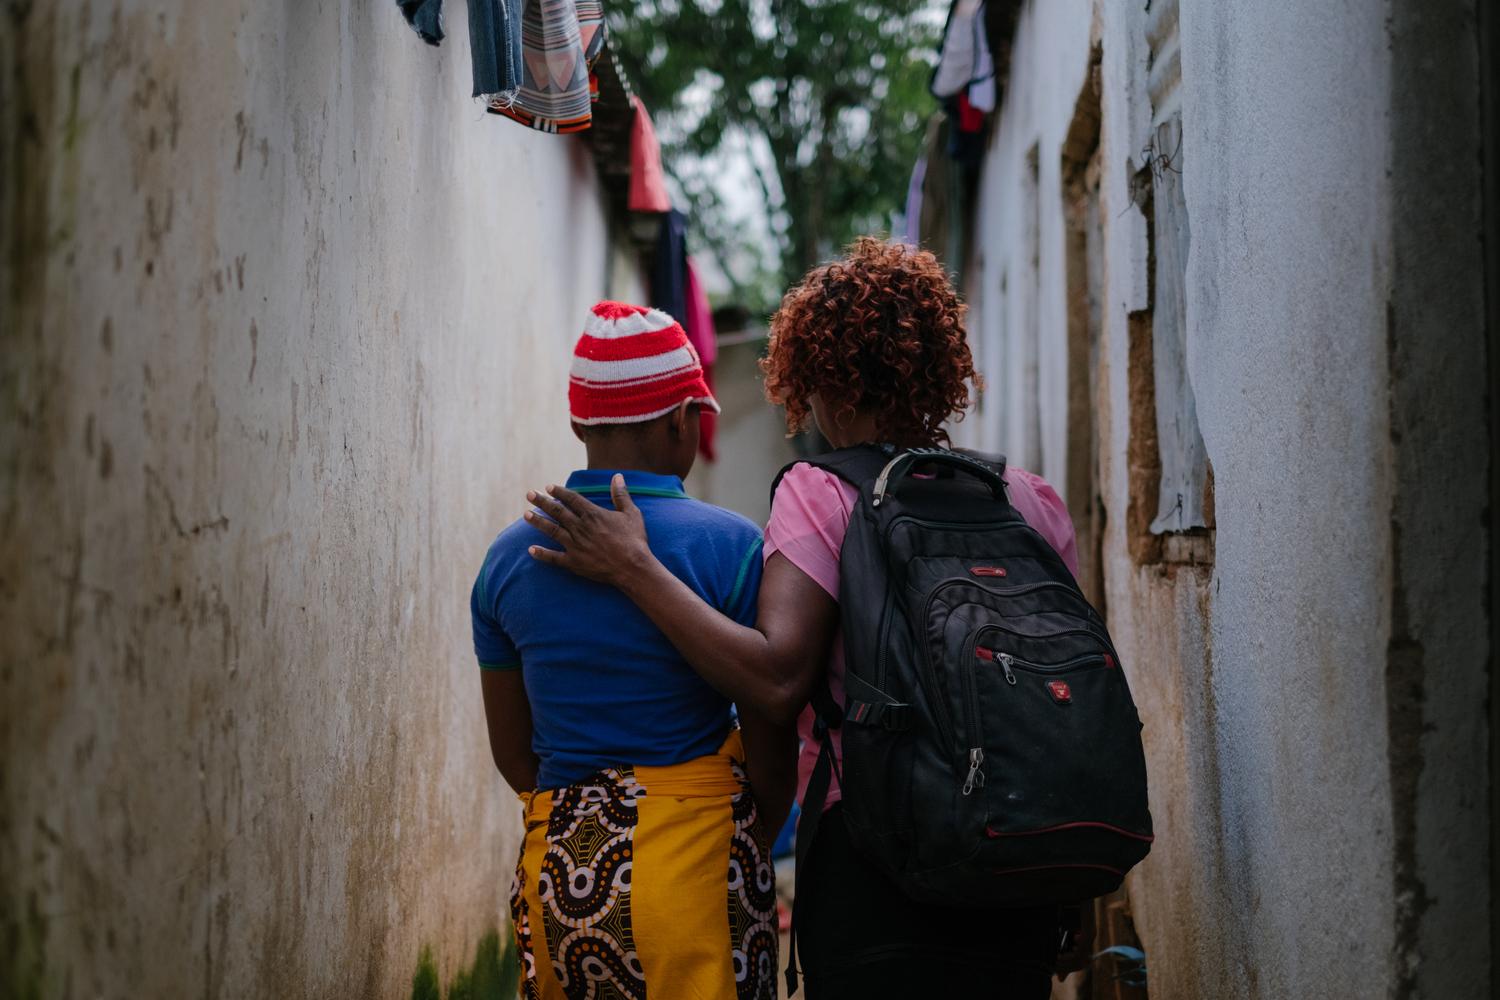 MSF community Health worker Rozi (not her real name) interacting with one of the sex workers behind a bar hotspot in the centre of Mwanza town. Malawi. January 2019. 